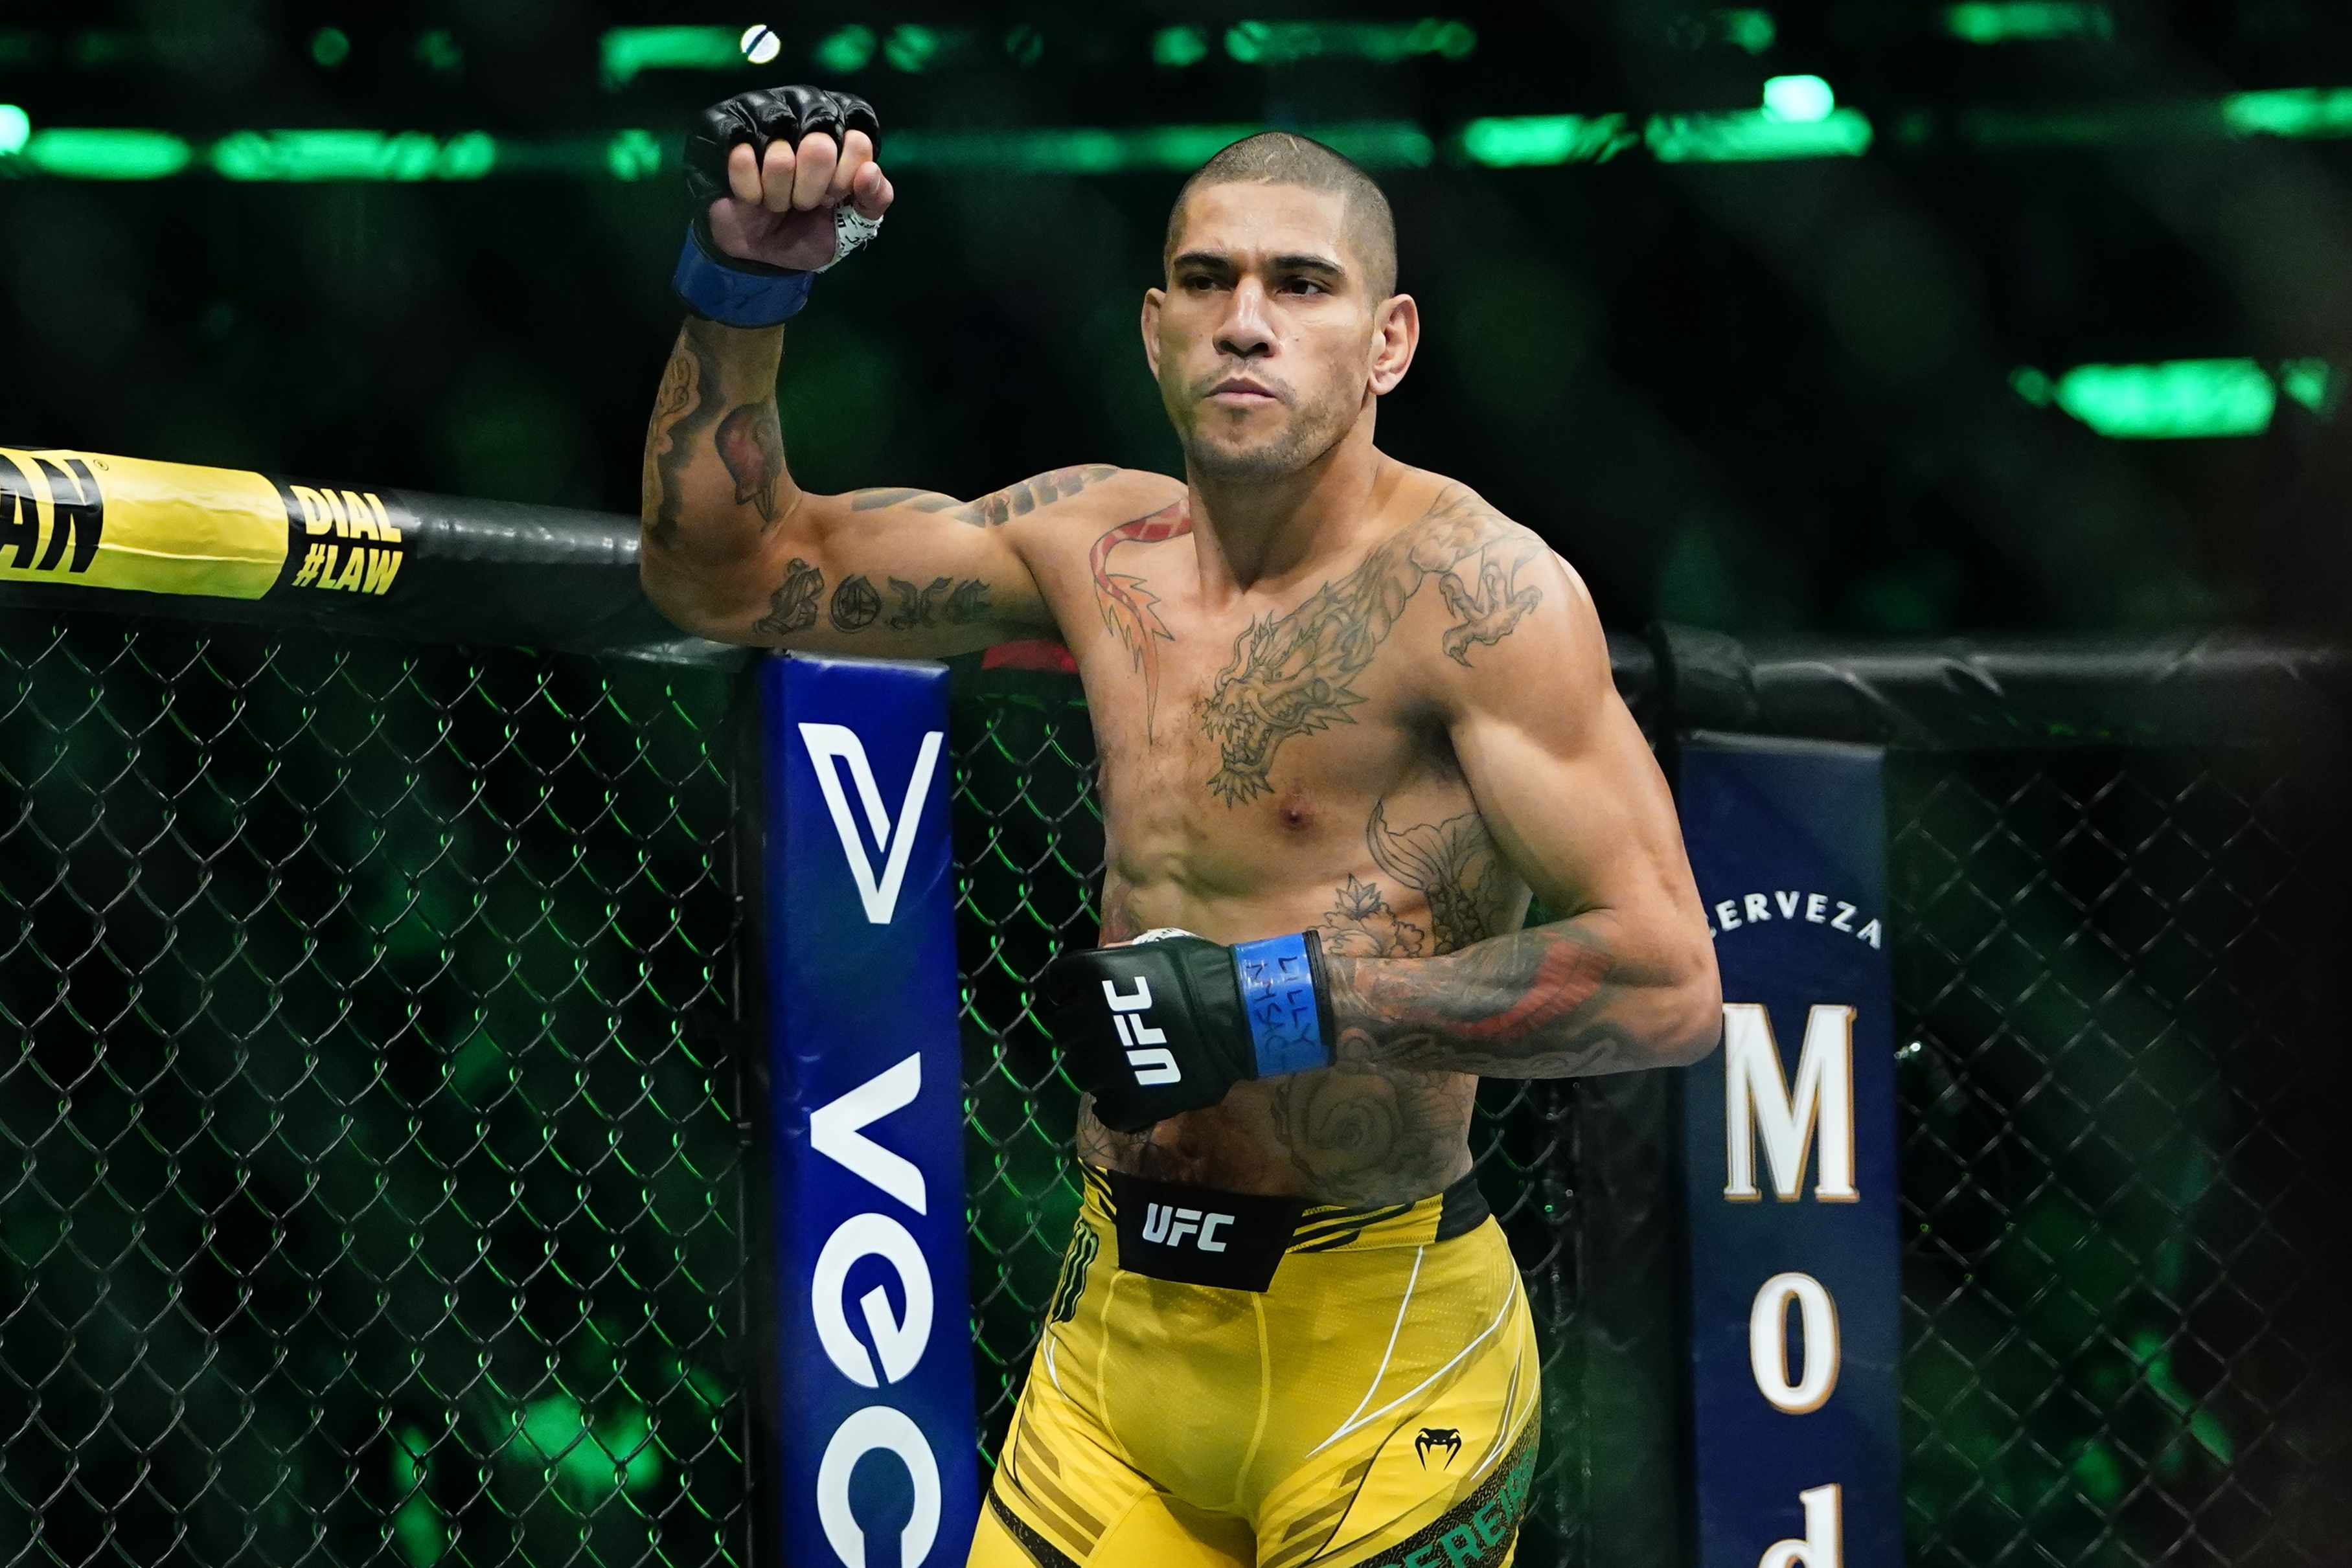 Alex Pereira, Danbury resident, wins UFC middleweight title at MSG